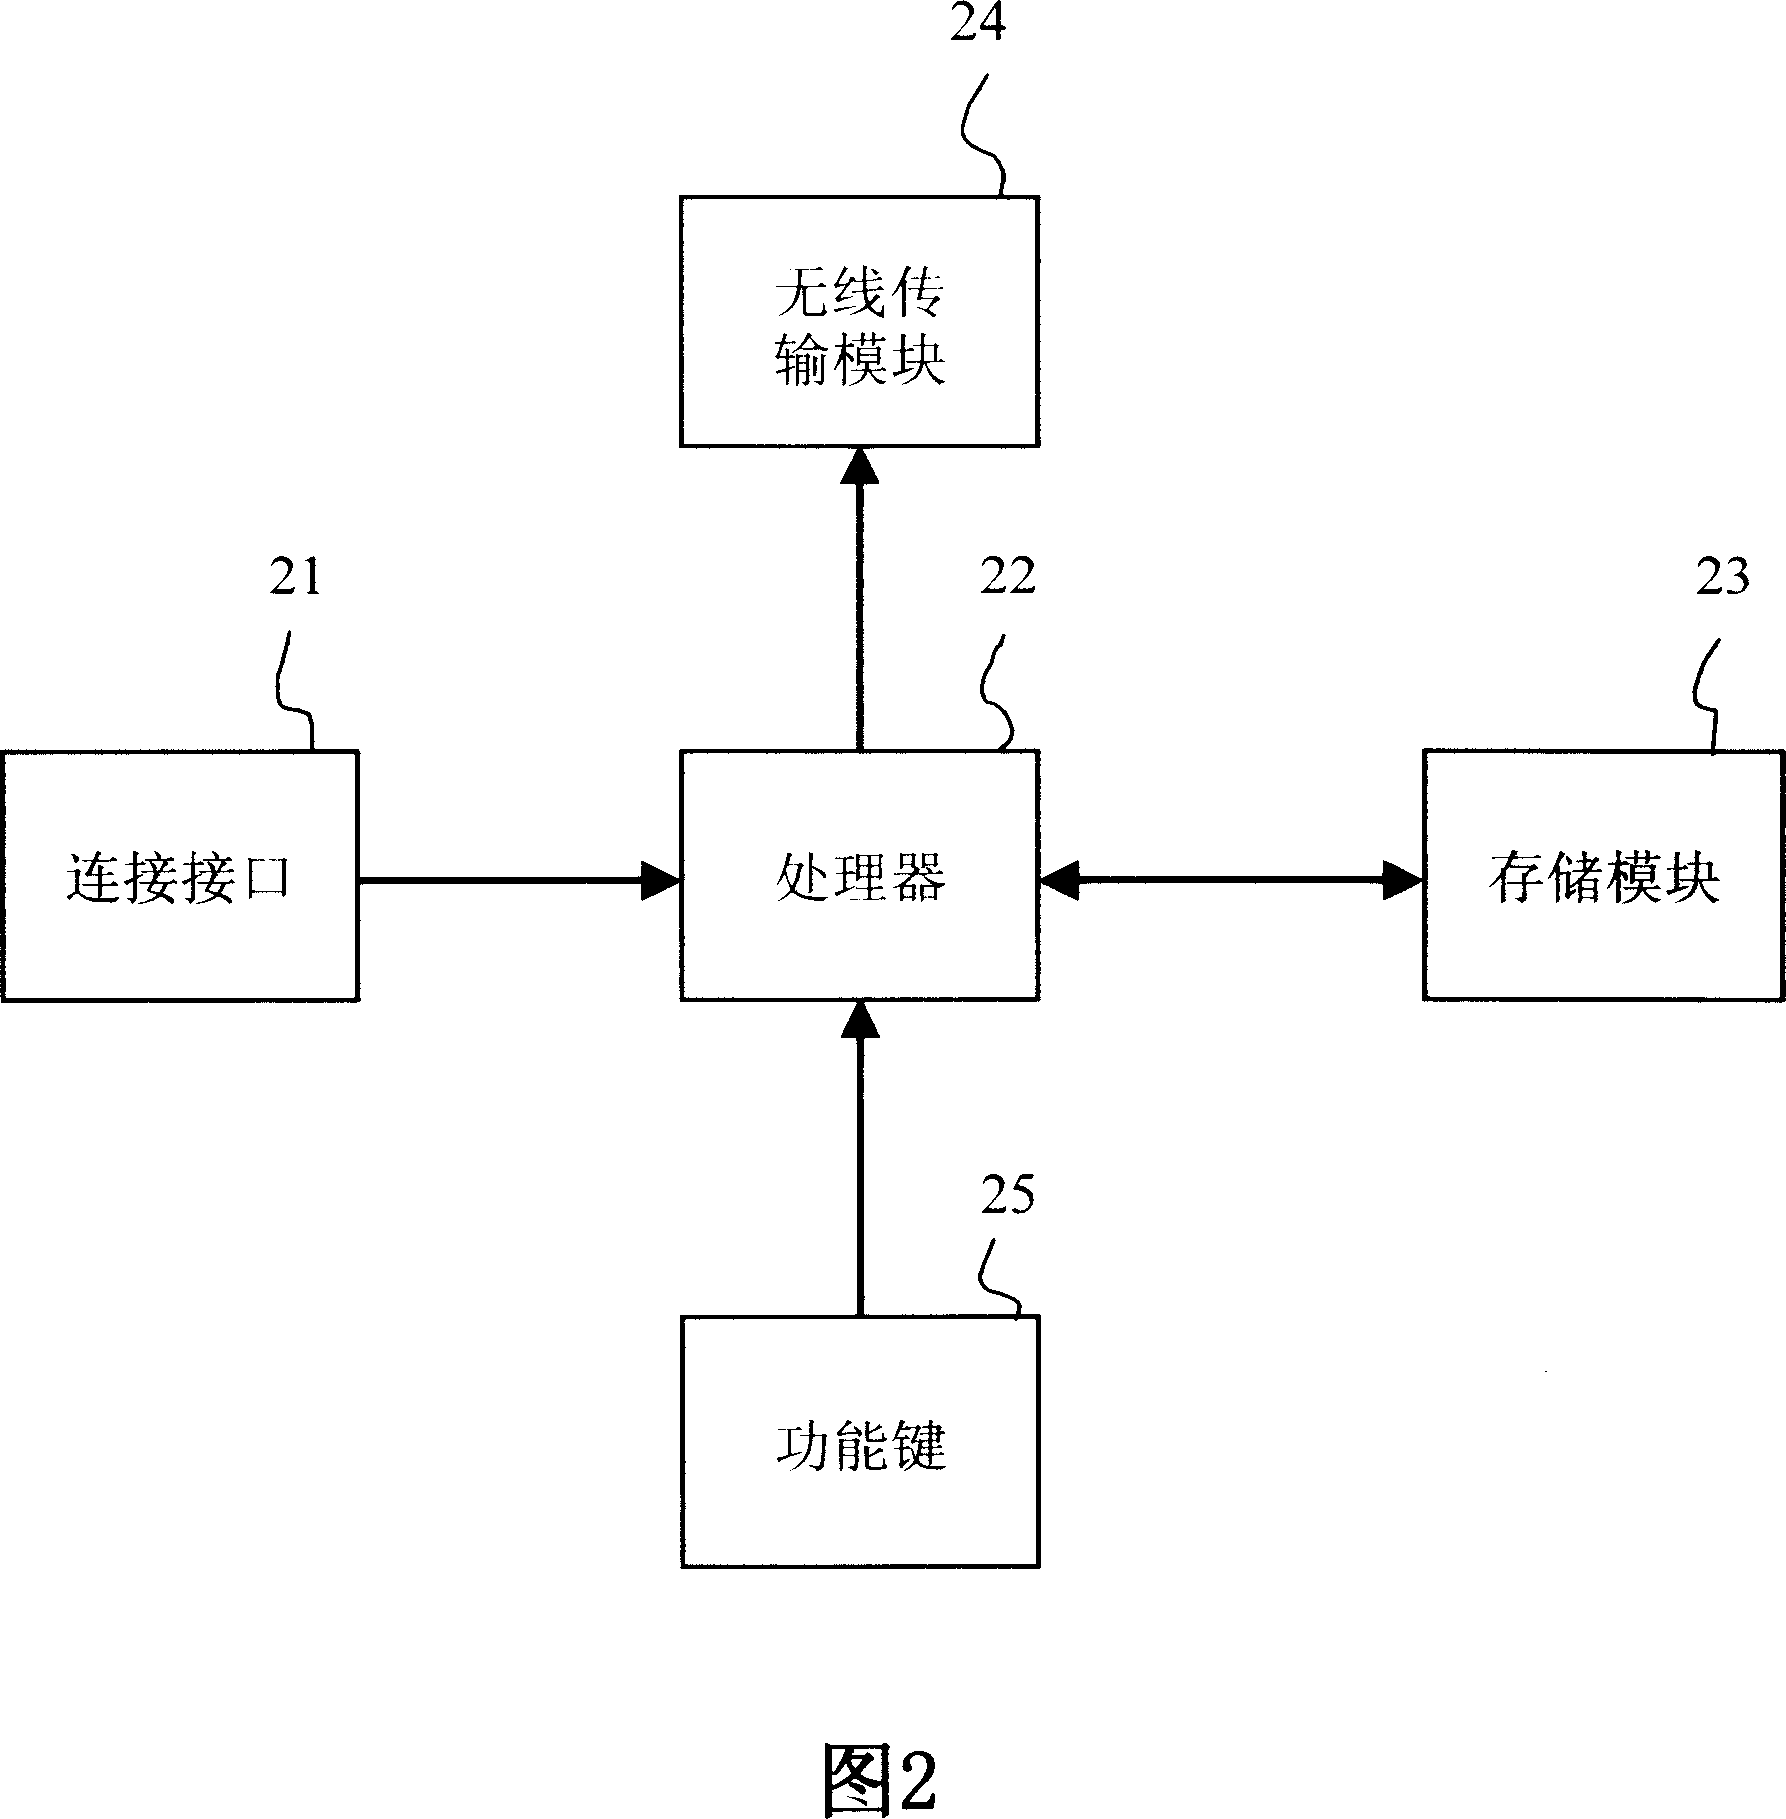 Remote control device capable of automatically switching channels